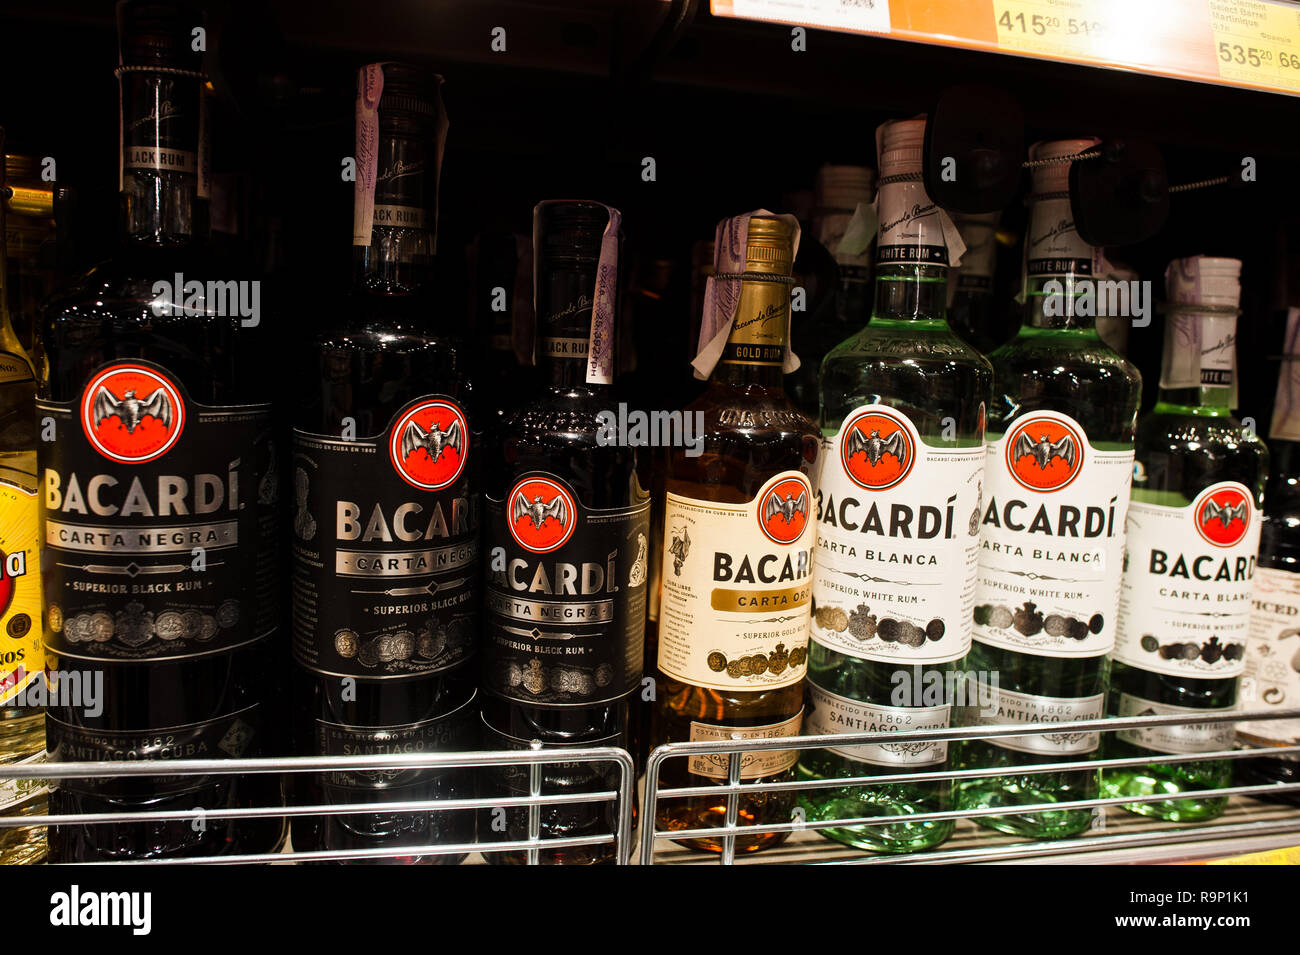 Kyiv, Ukraine - December 19, 2018: Bottles of Bacardi on shelves in a supermarket. Bacardi Limited is the largest privately held, family-owned spirits Stock Photo